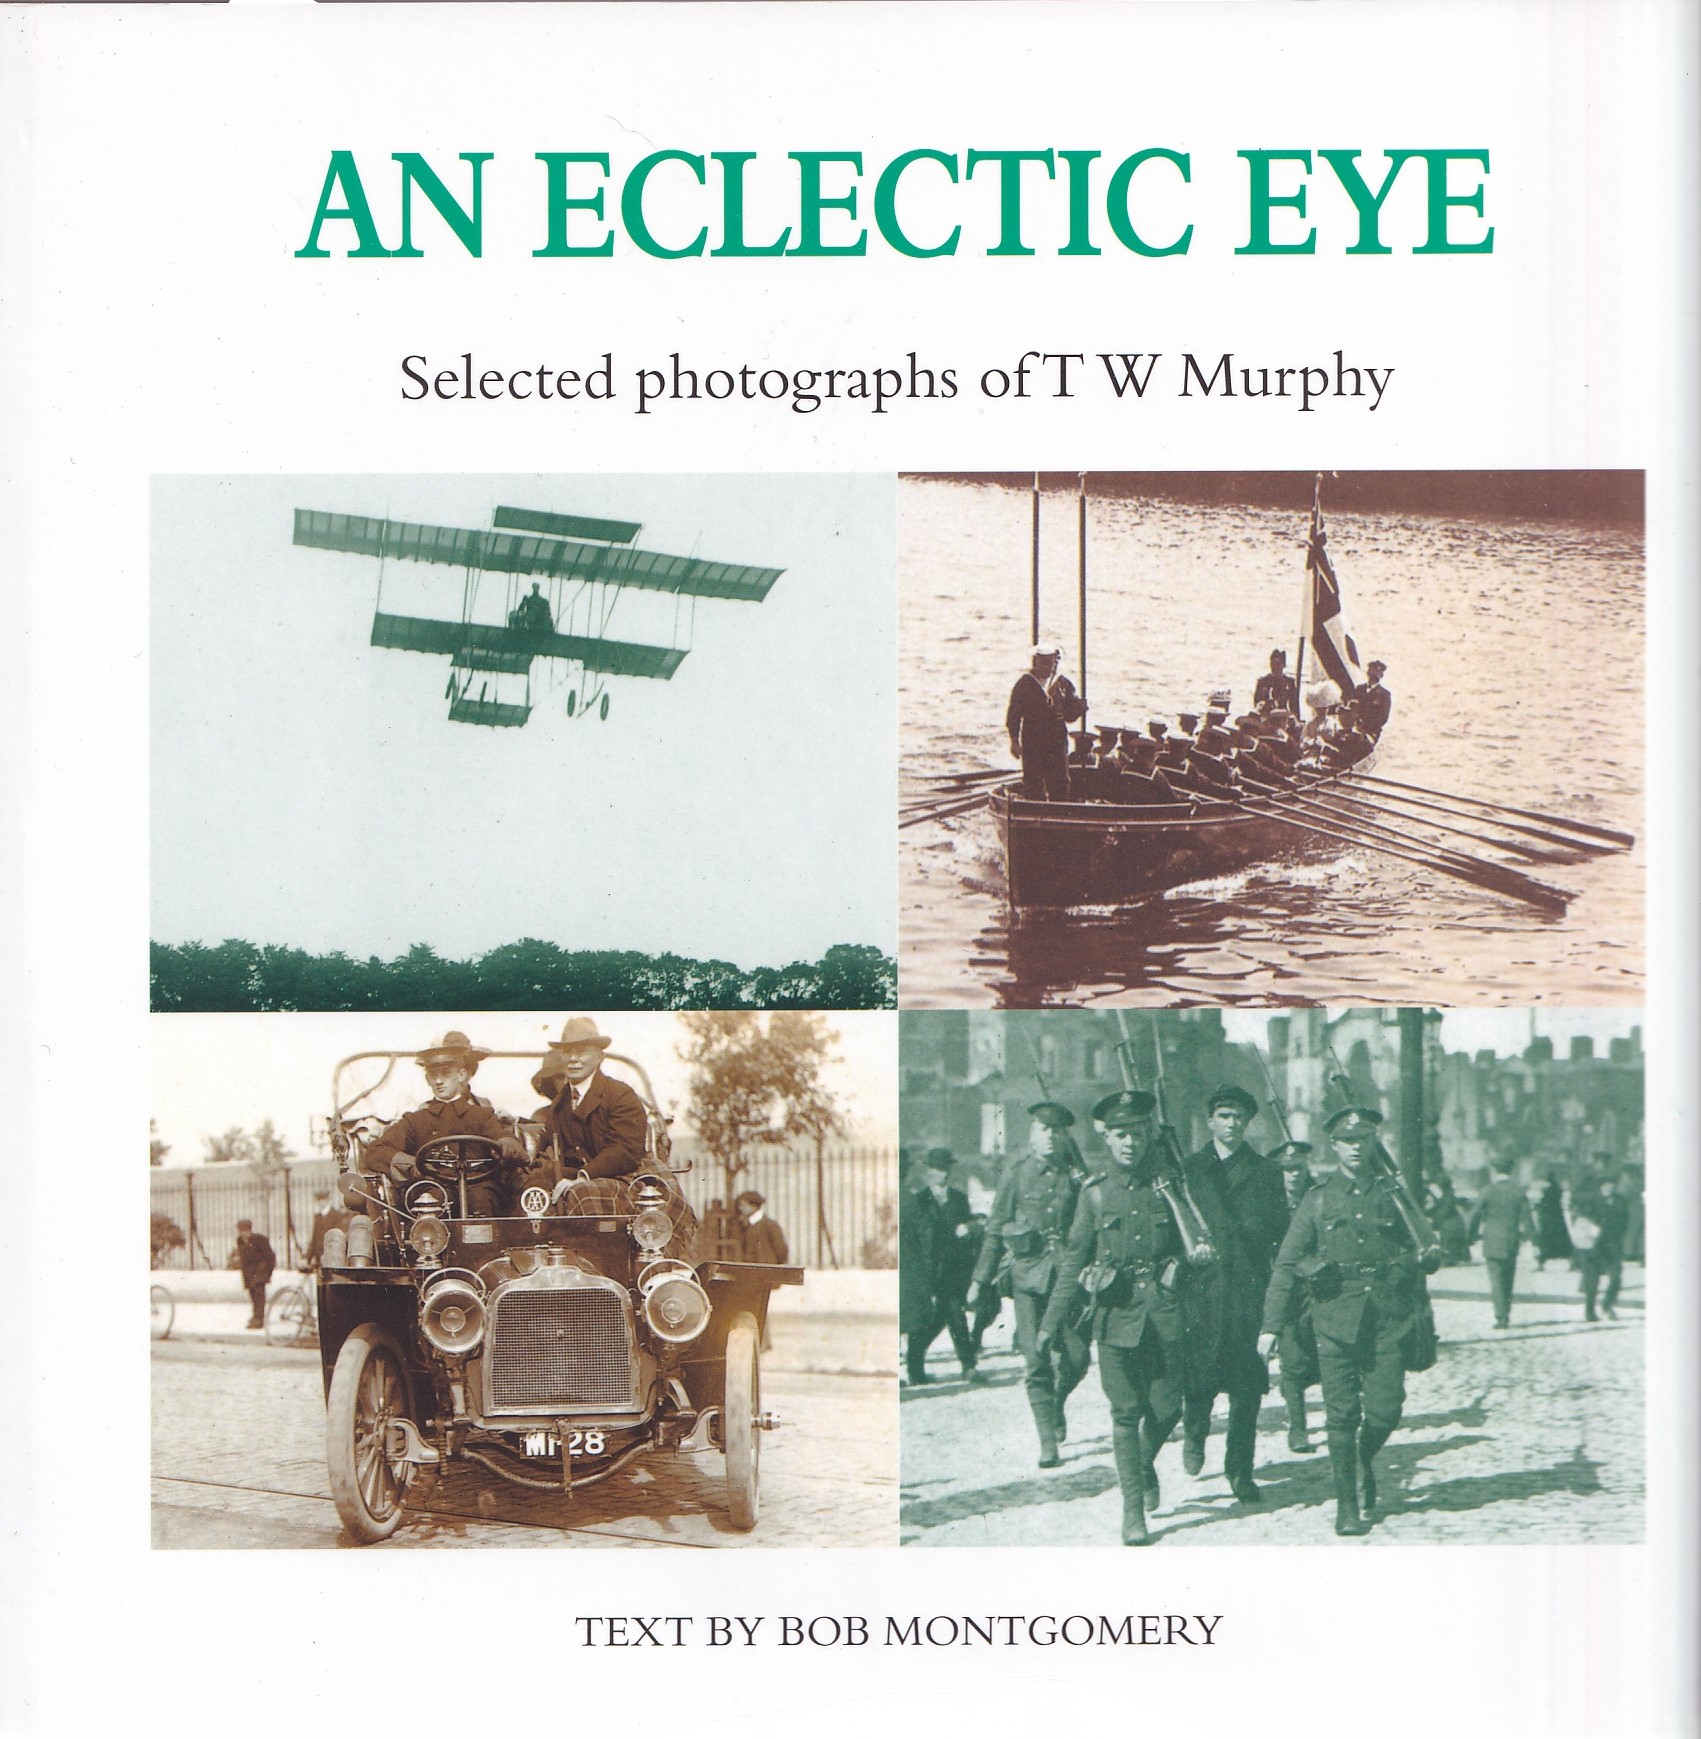 An Eclectic Eye: Selected Photographs of T. W. Murphy by Bob Montgomery